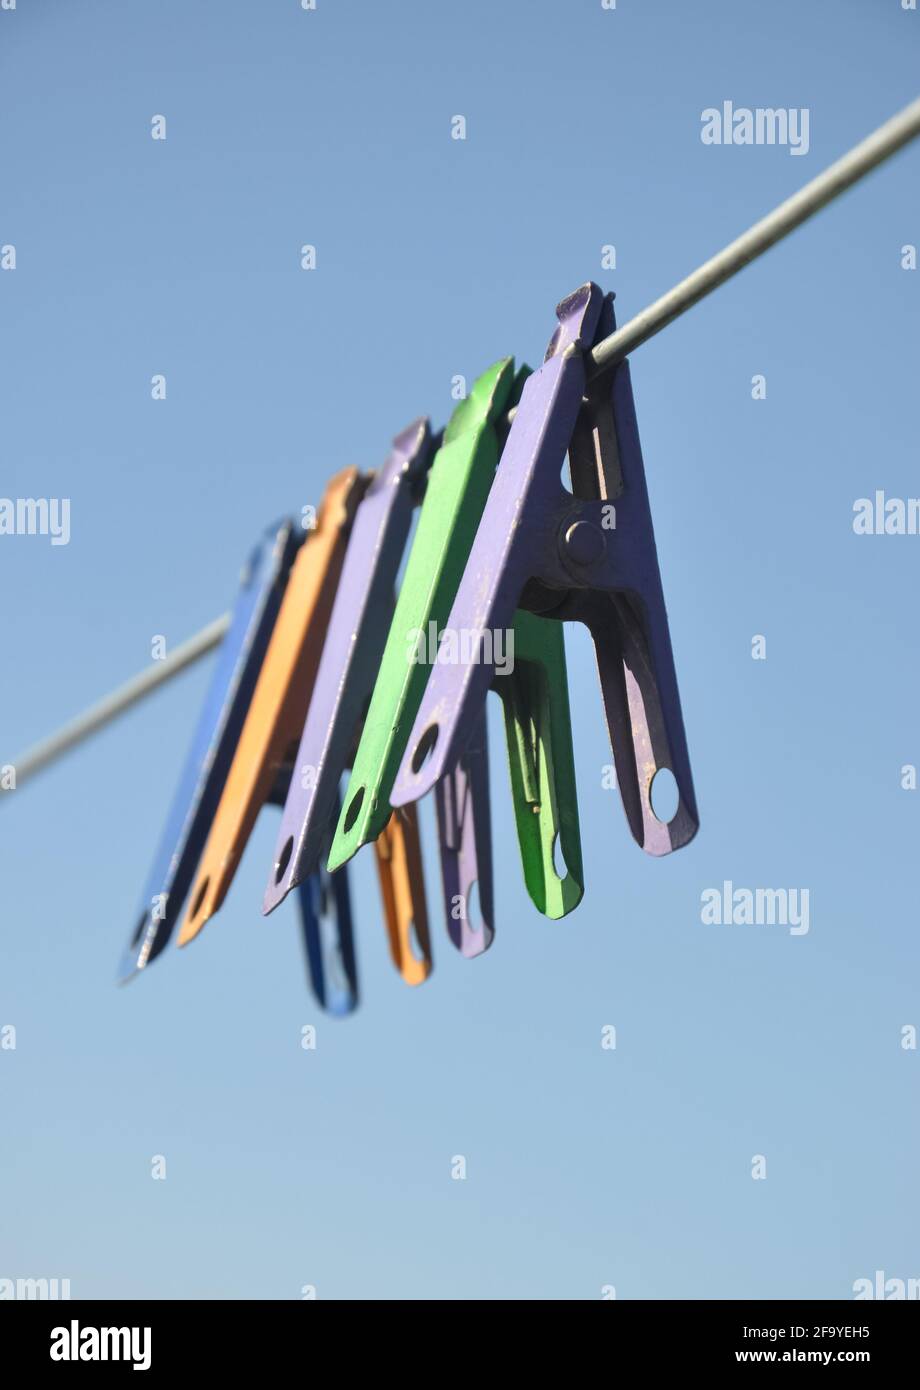 Low angle shot of multicolored cloth pins hanging on wire in outdoor with blue sky in background Stock Photo